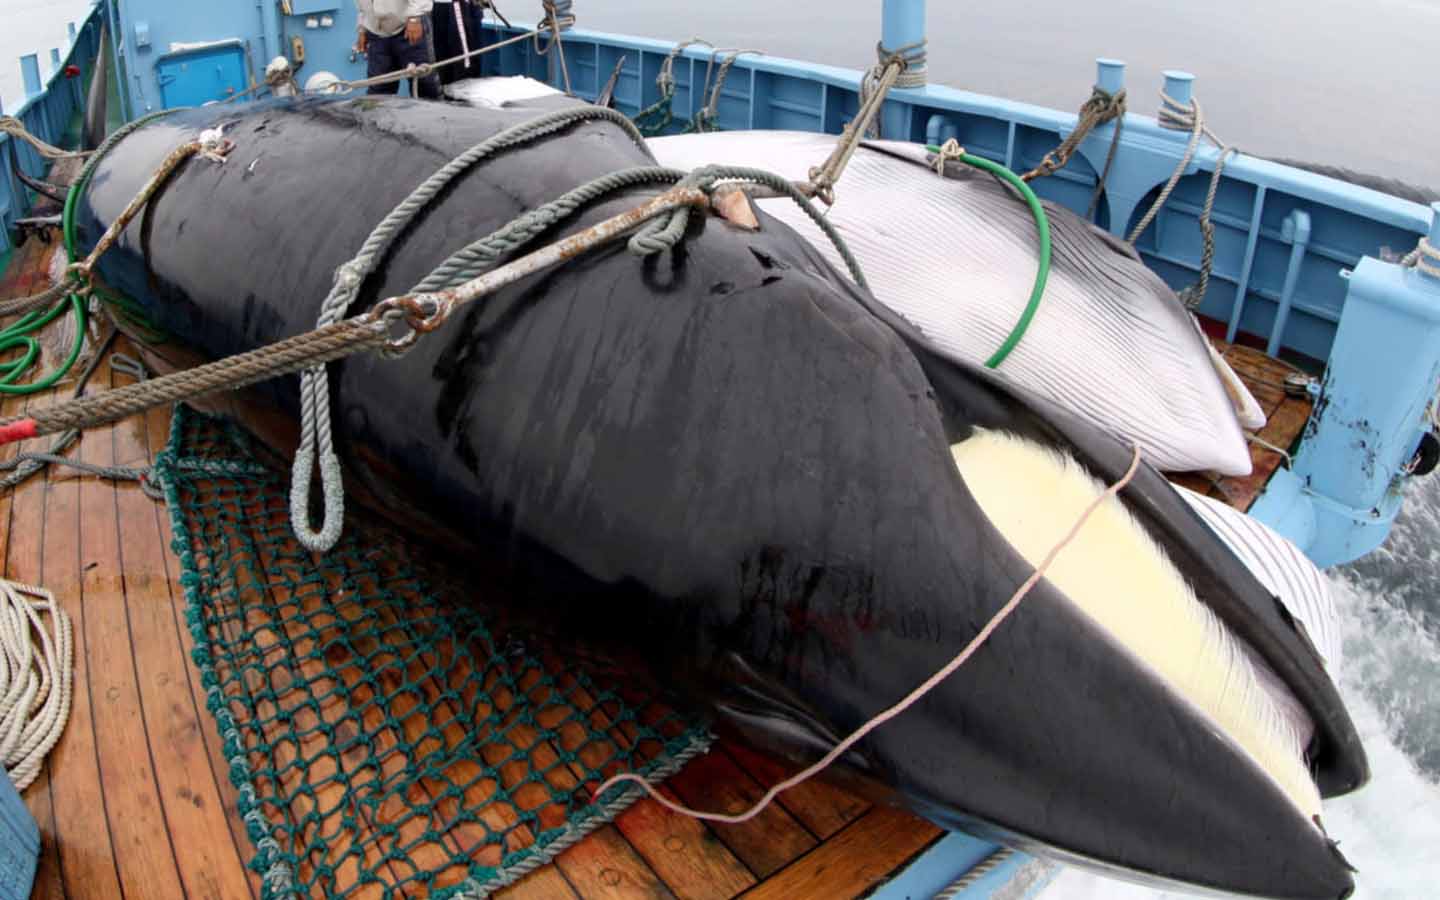 Japan to resume whaling from July 1, 2019